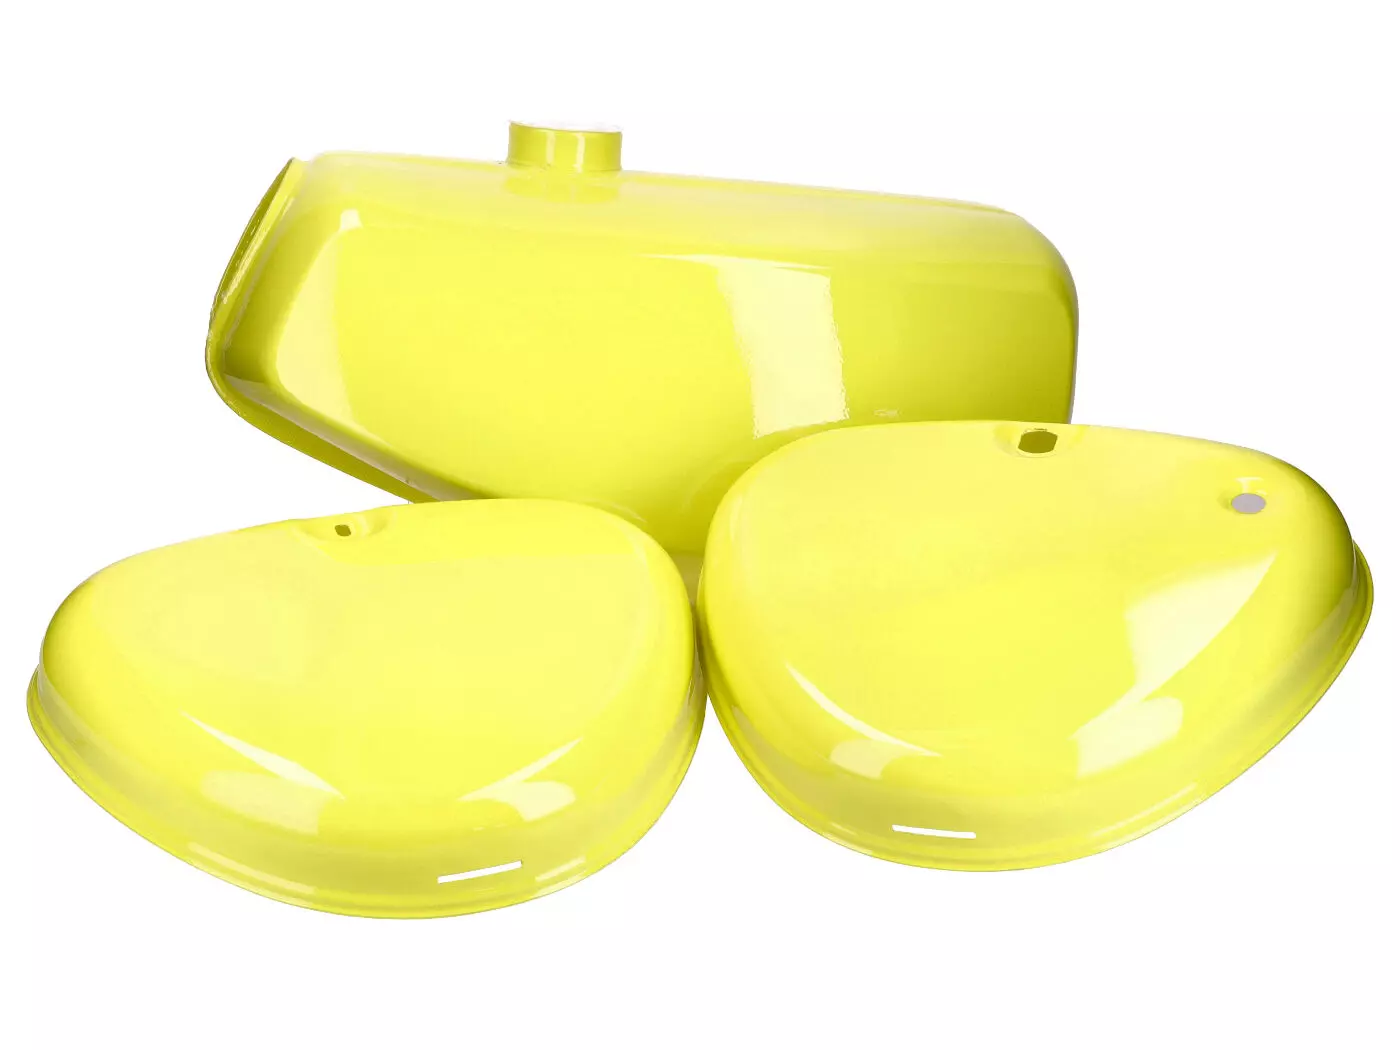 Fuel Tank And Side Cover Set Yellow For Simson S50, S51, S70